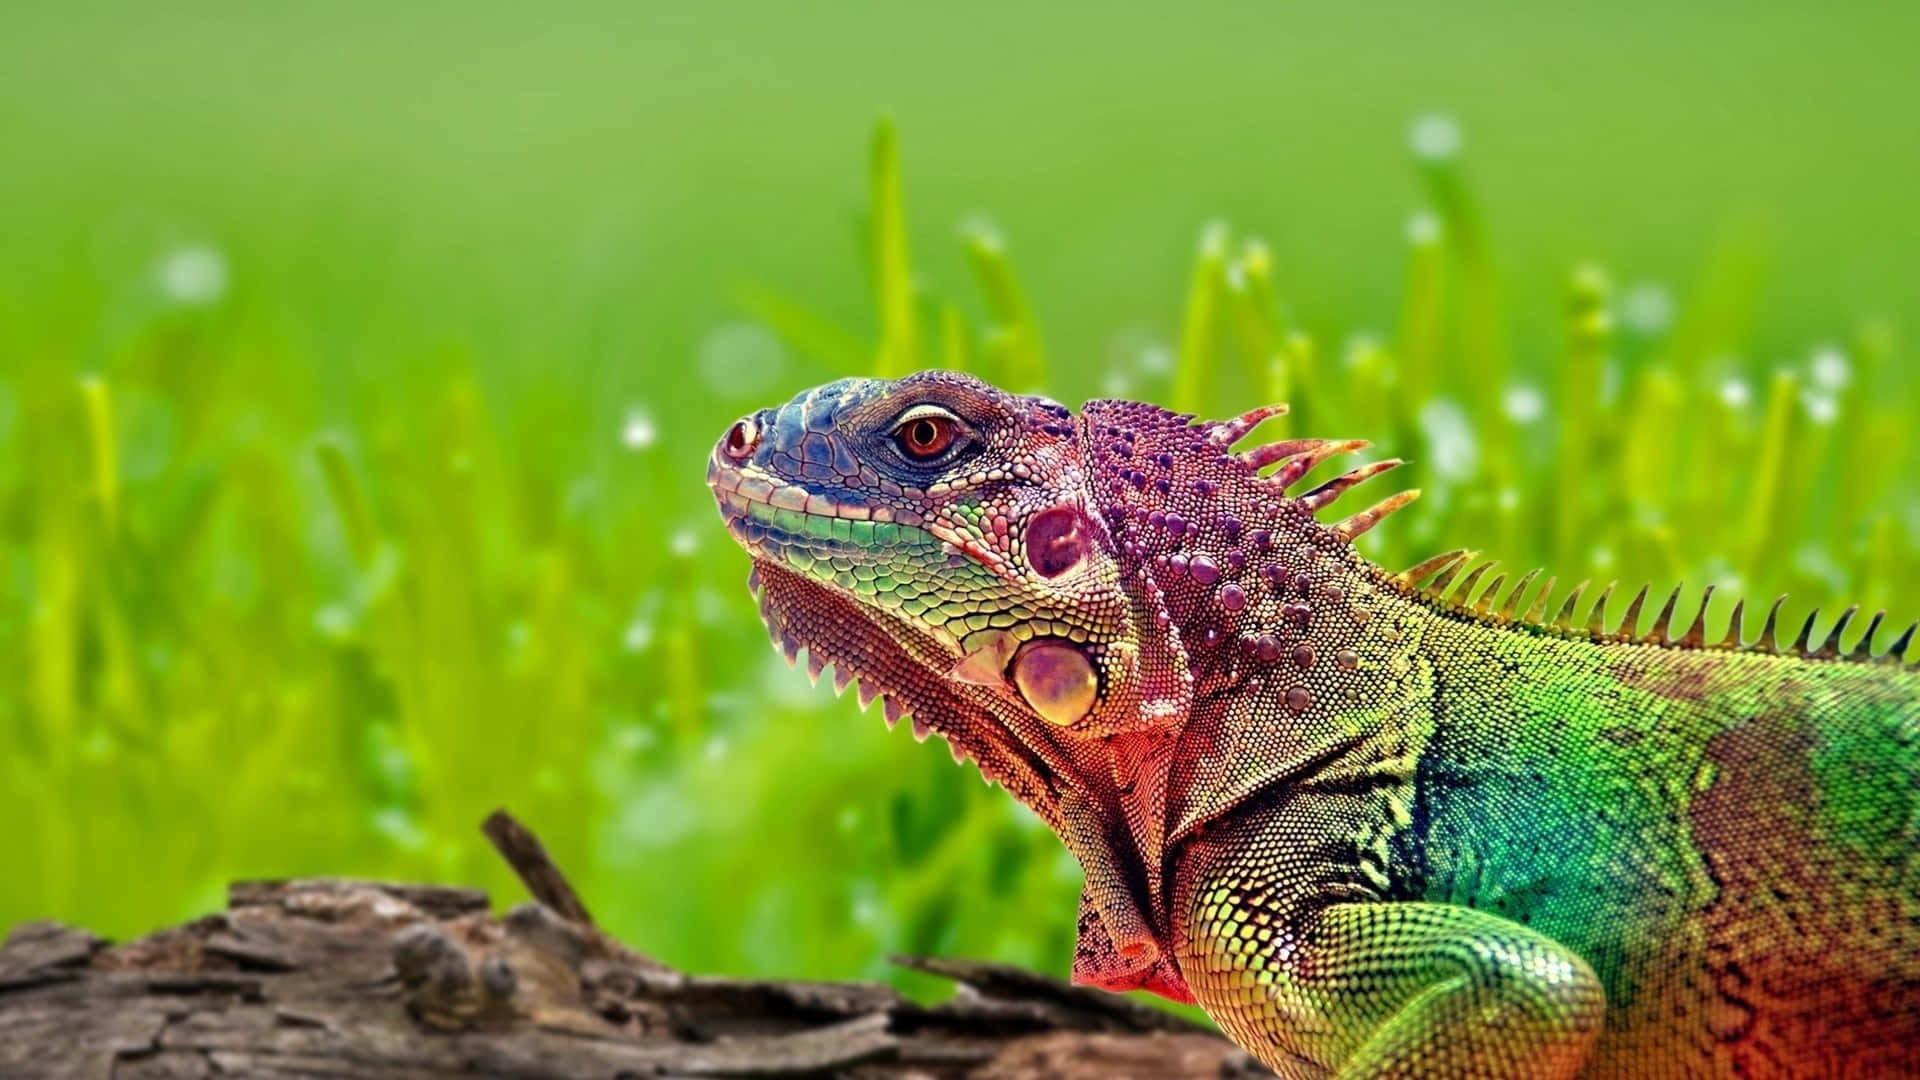 A Vividly Coloured Reptile Resting on a Branch